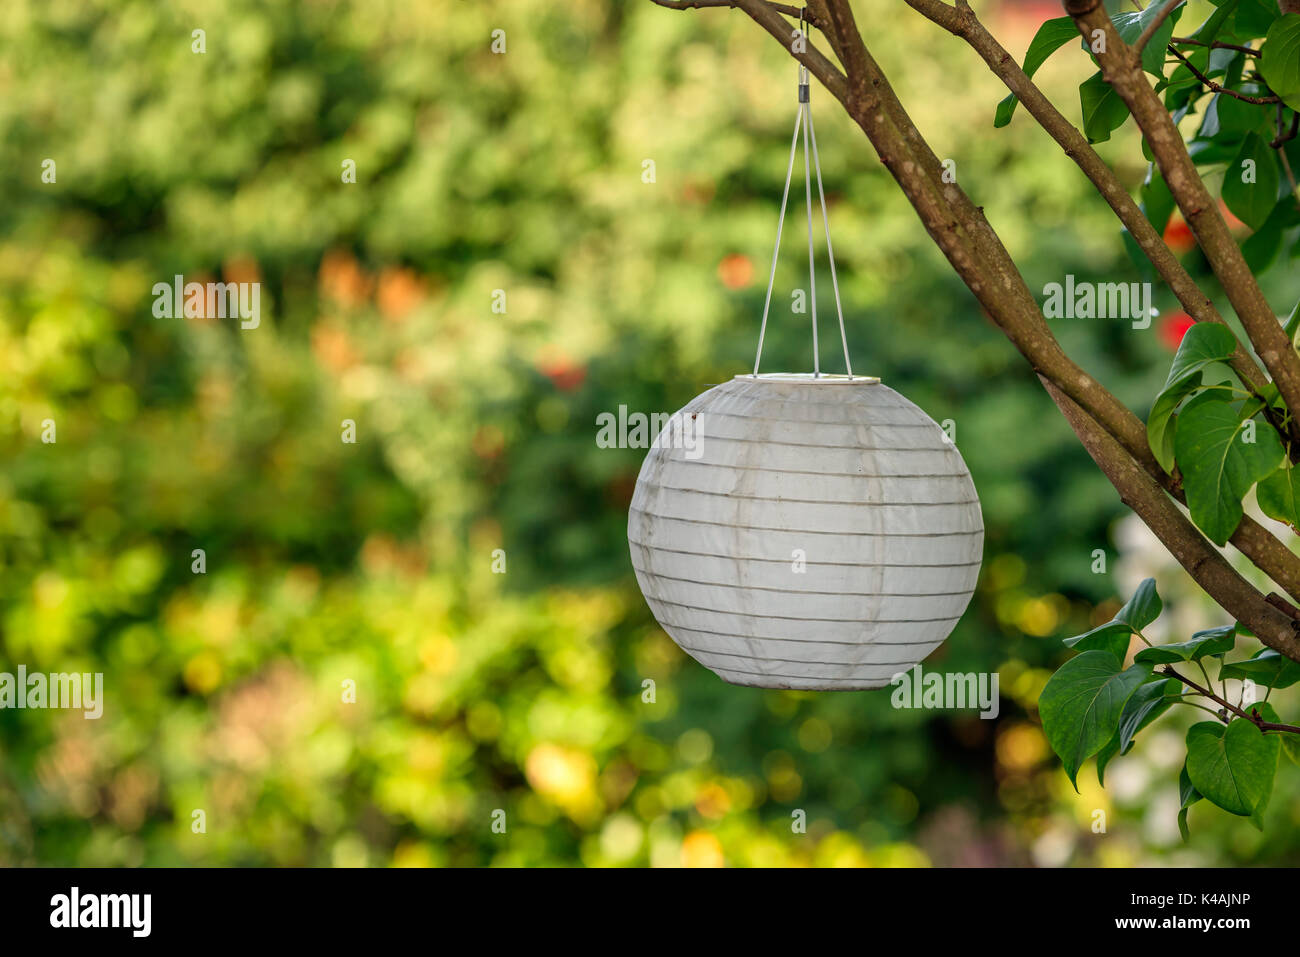 White paper lantern hanging from a tree in a garden. Stock Photo